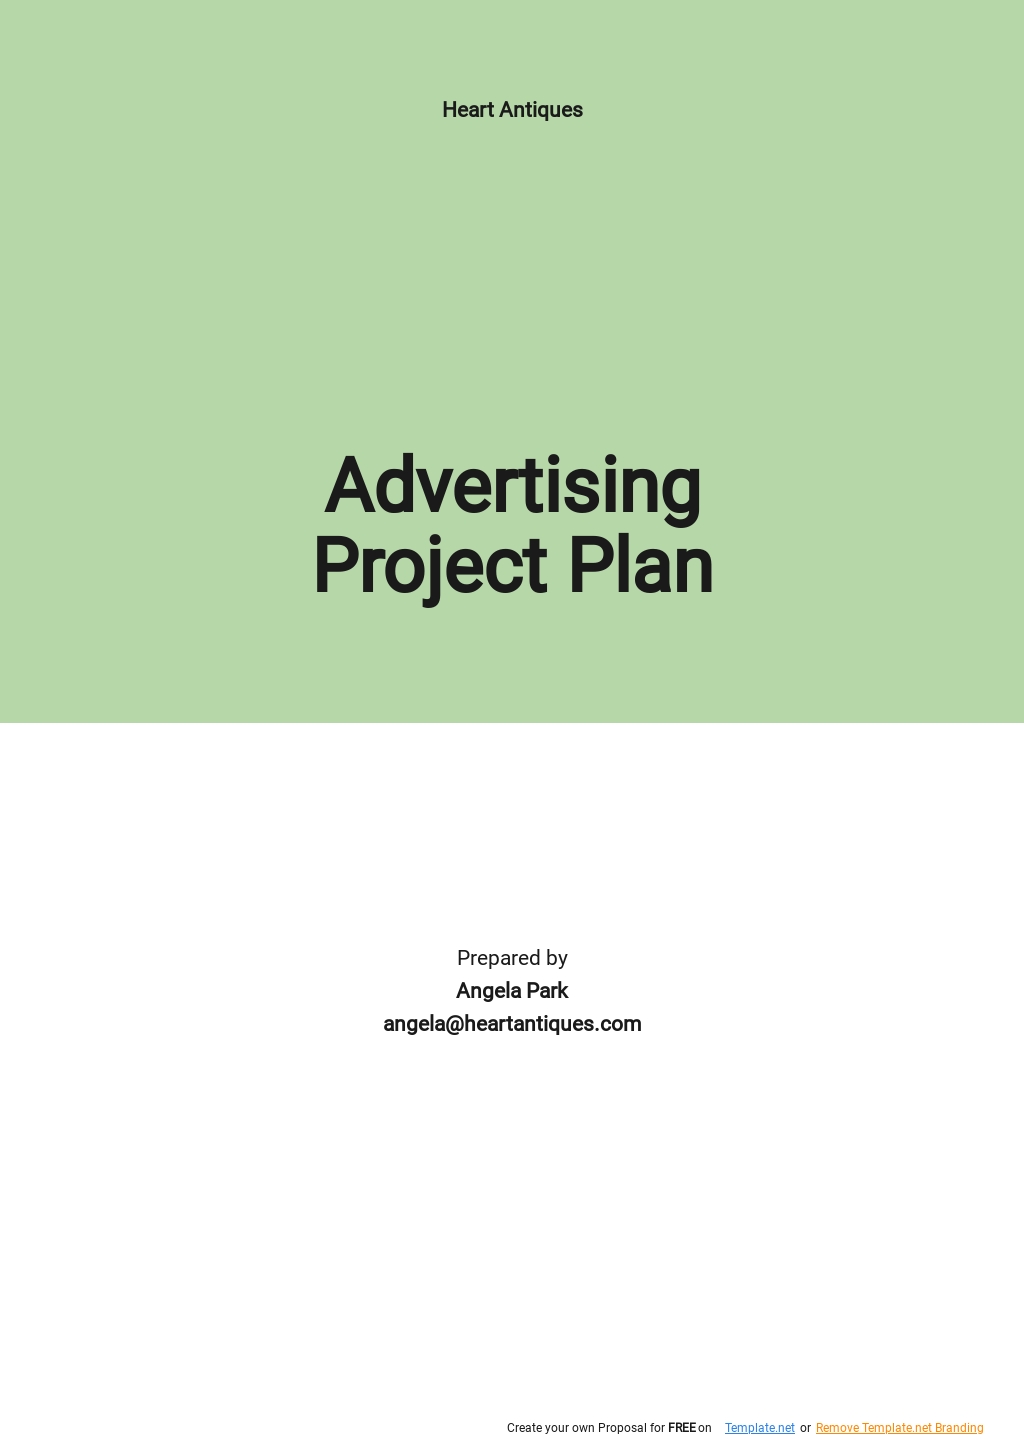 Advertising Project Plan Template - Google Docs, Word, Apple Pages, PDF